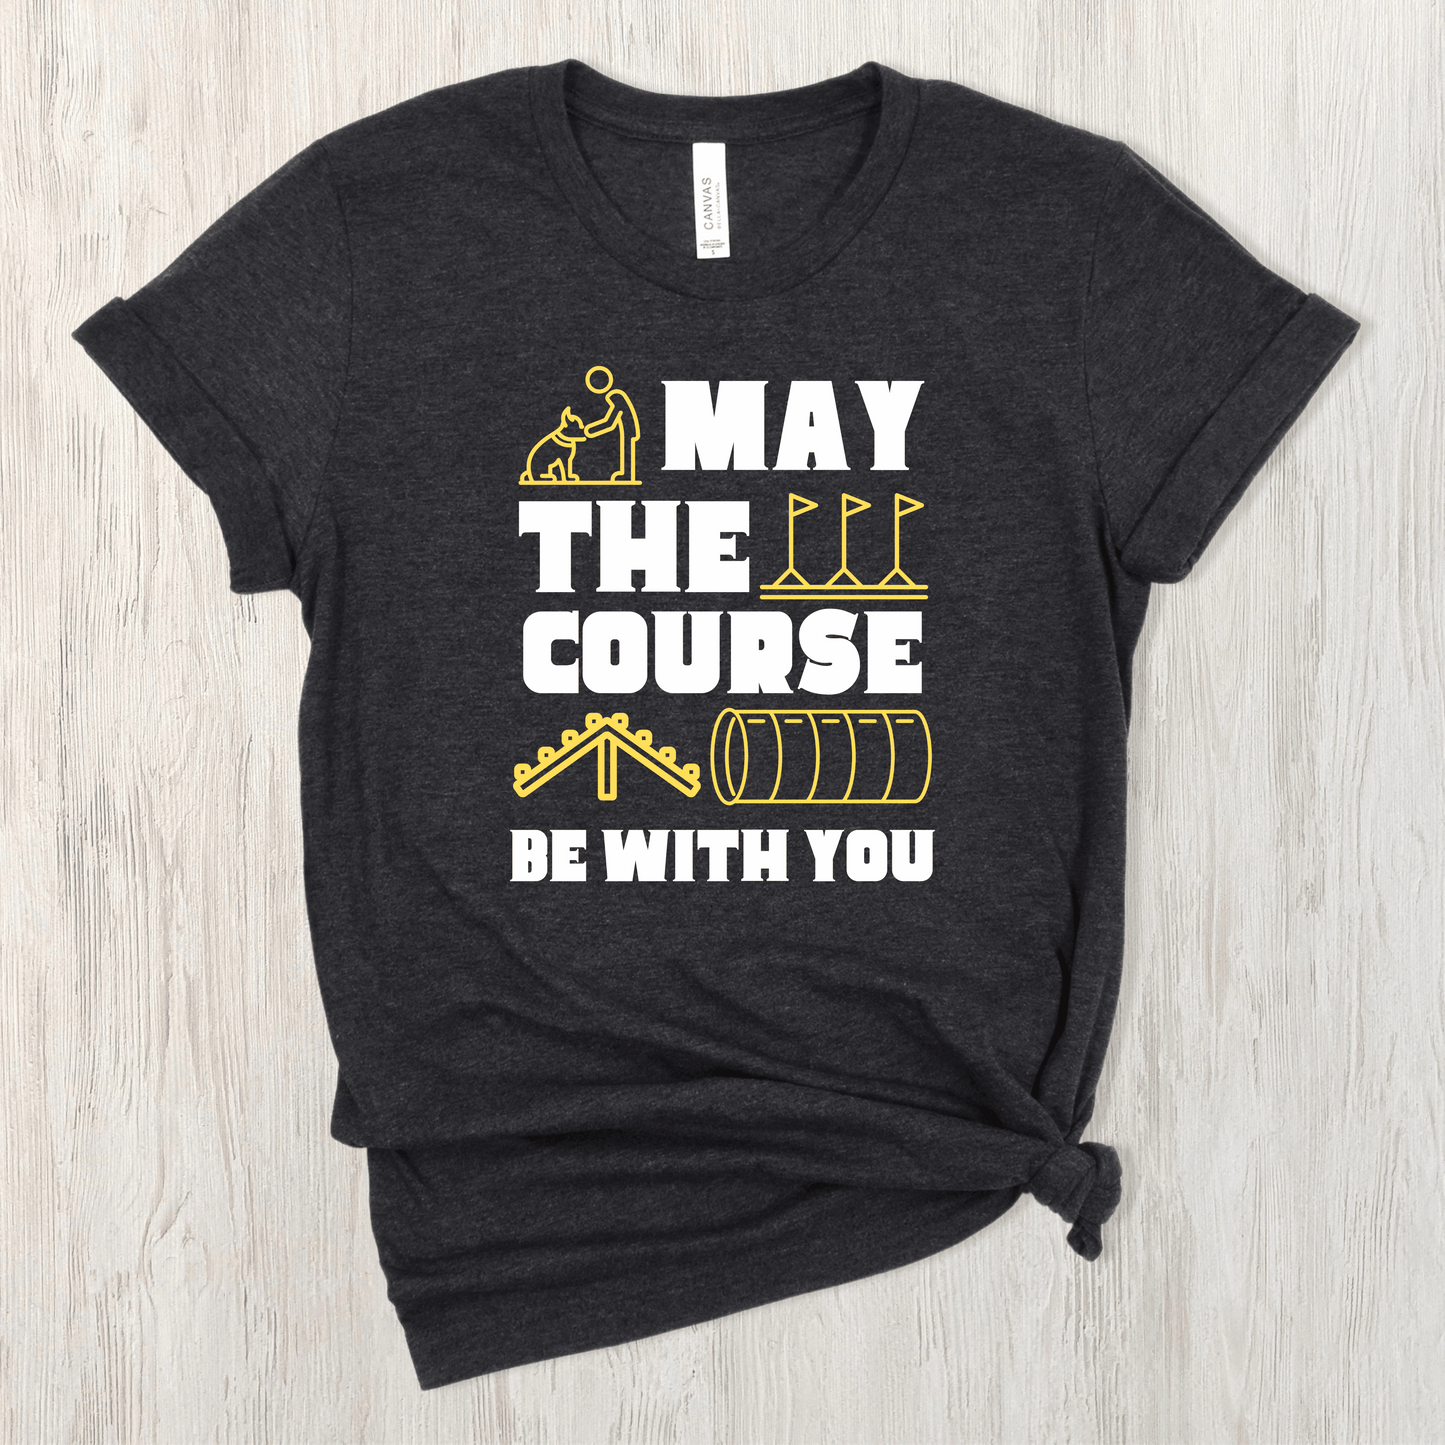 Dark Grey Heather tee featuring the text "May The Force Be With You" as well as agility related images.